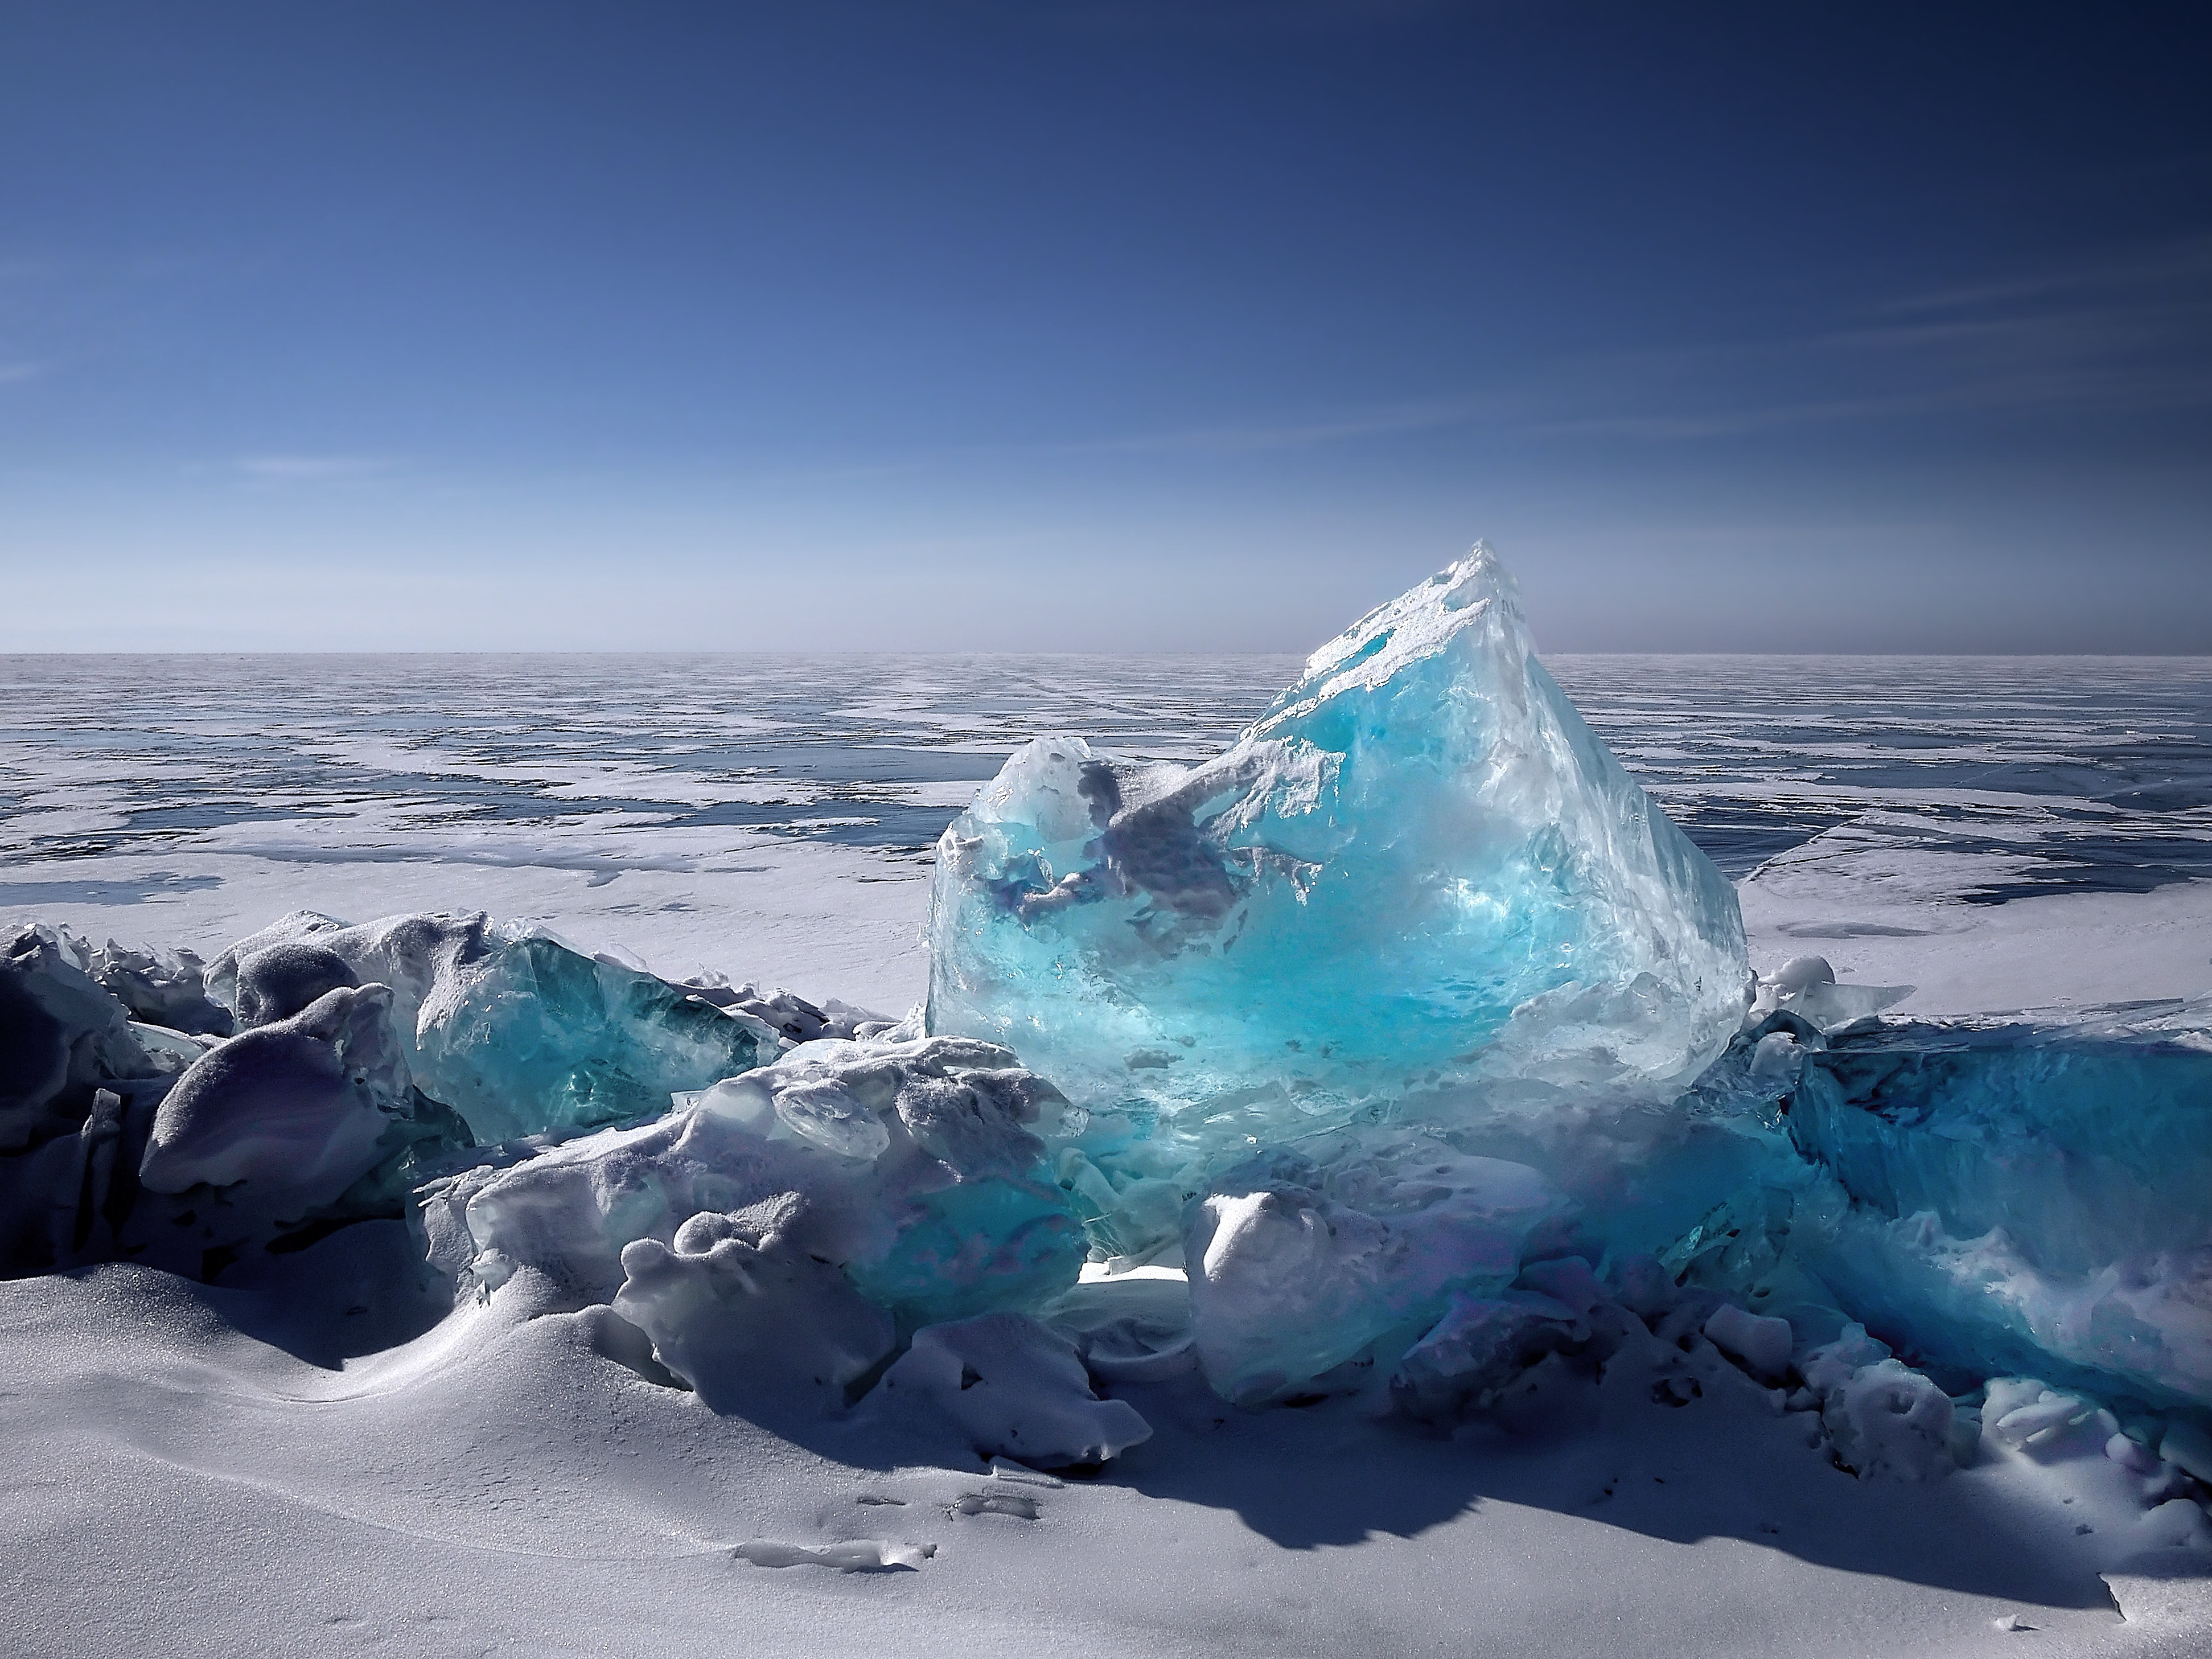 Adwords Grant Changes - just the tip of the iceberg